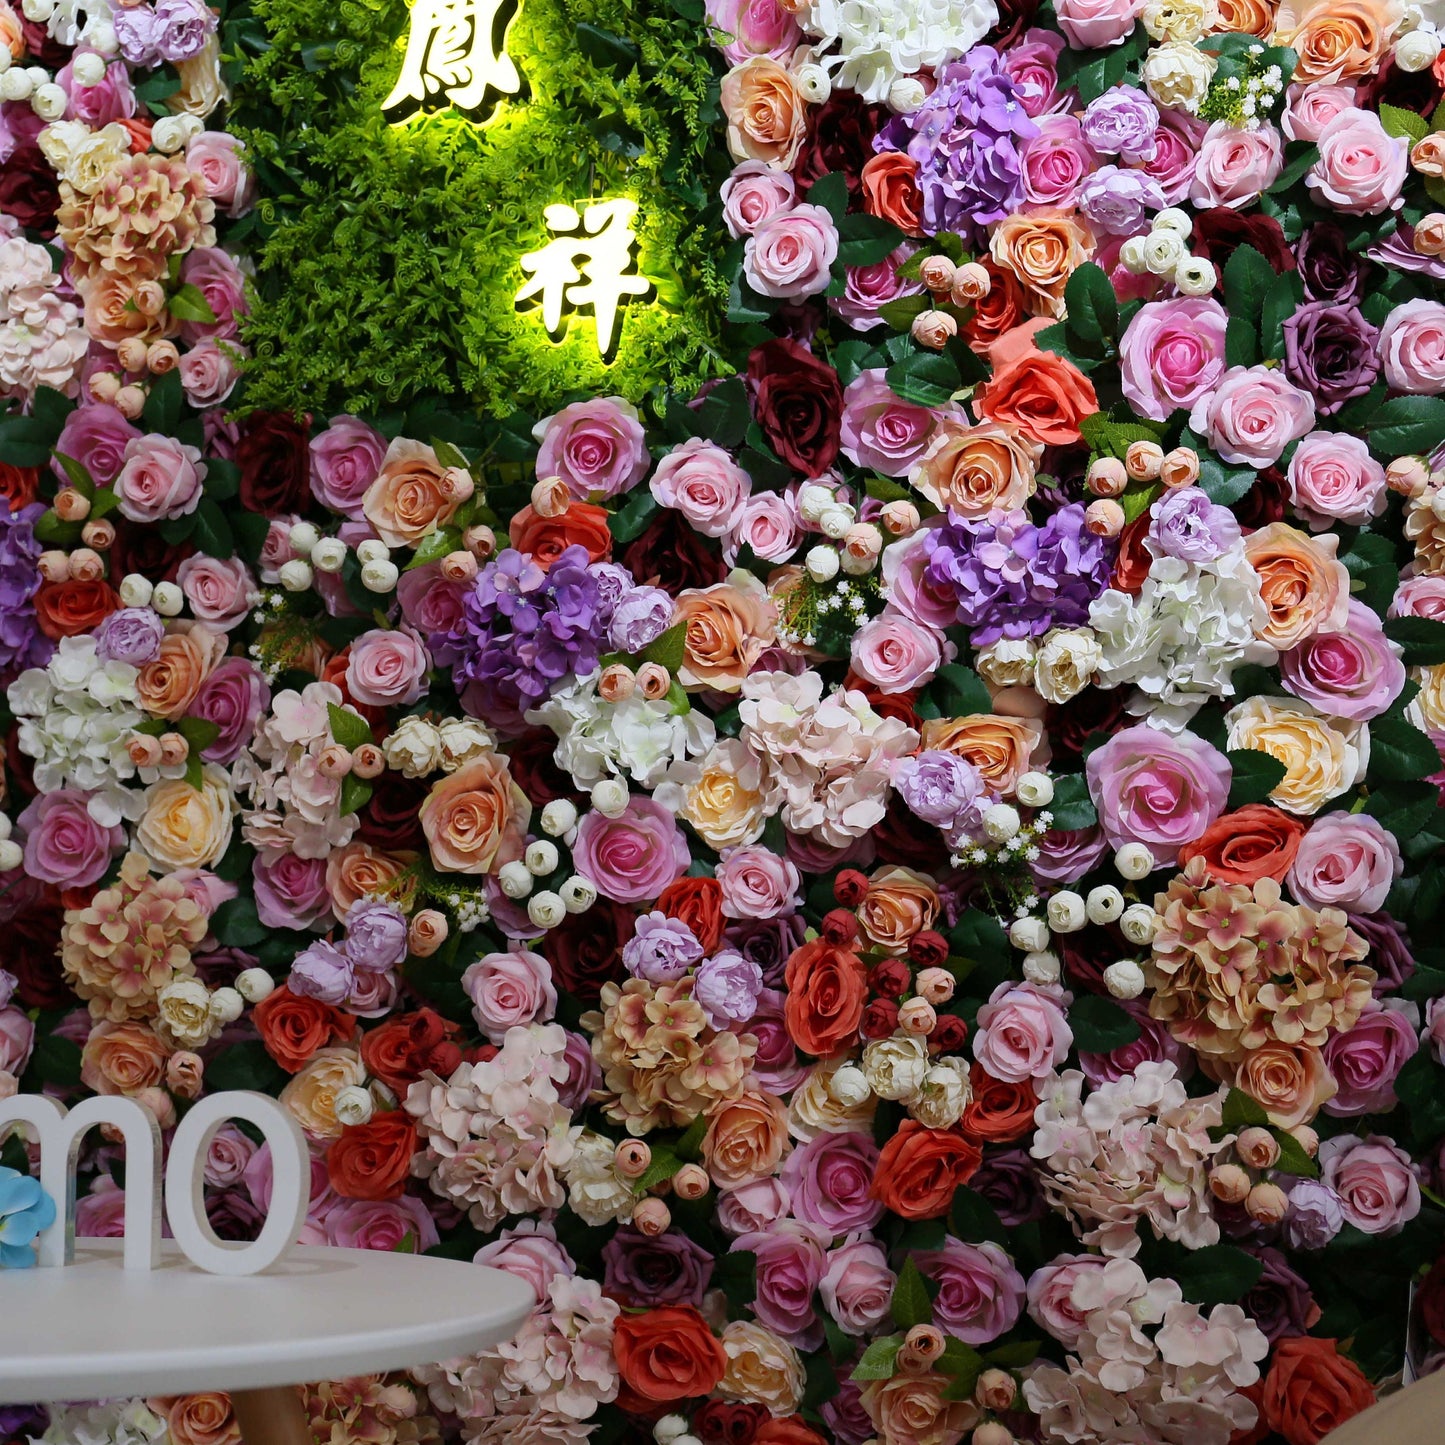 New Fake Flower Wall for Wedding Photography Backdrop Simulation Rose for Special Event Party Decor Panel 15.75x23.62inch